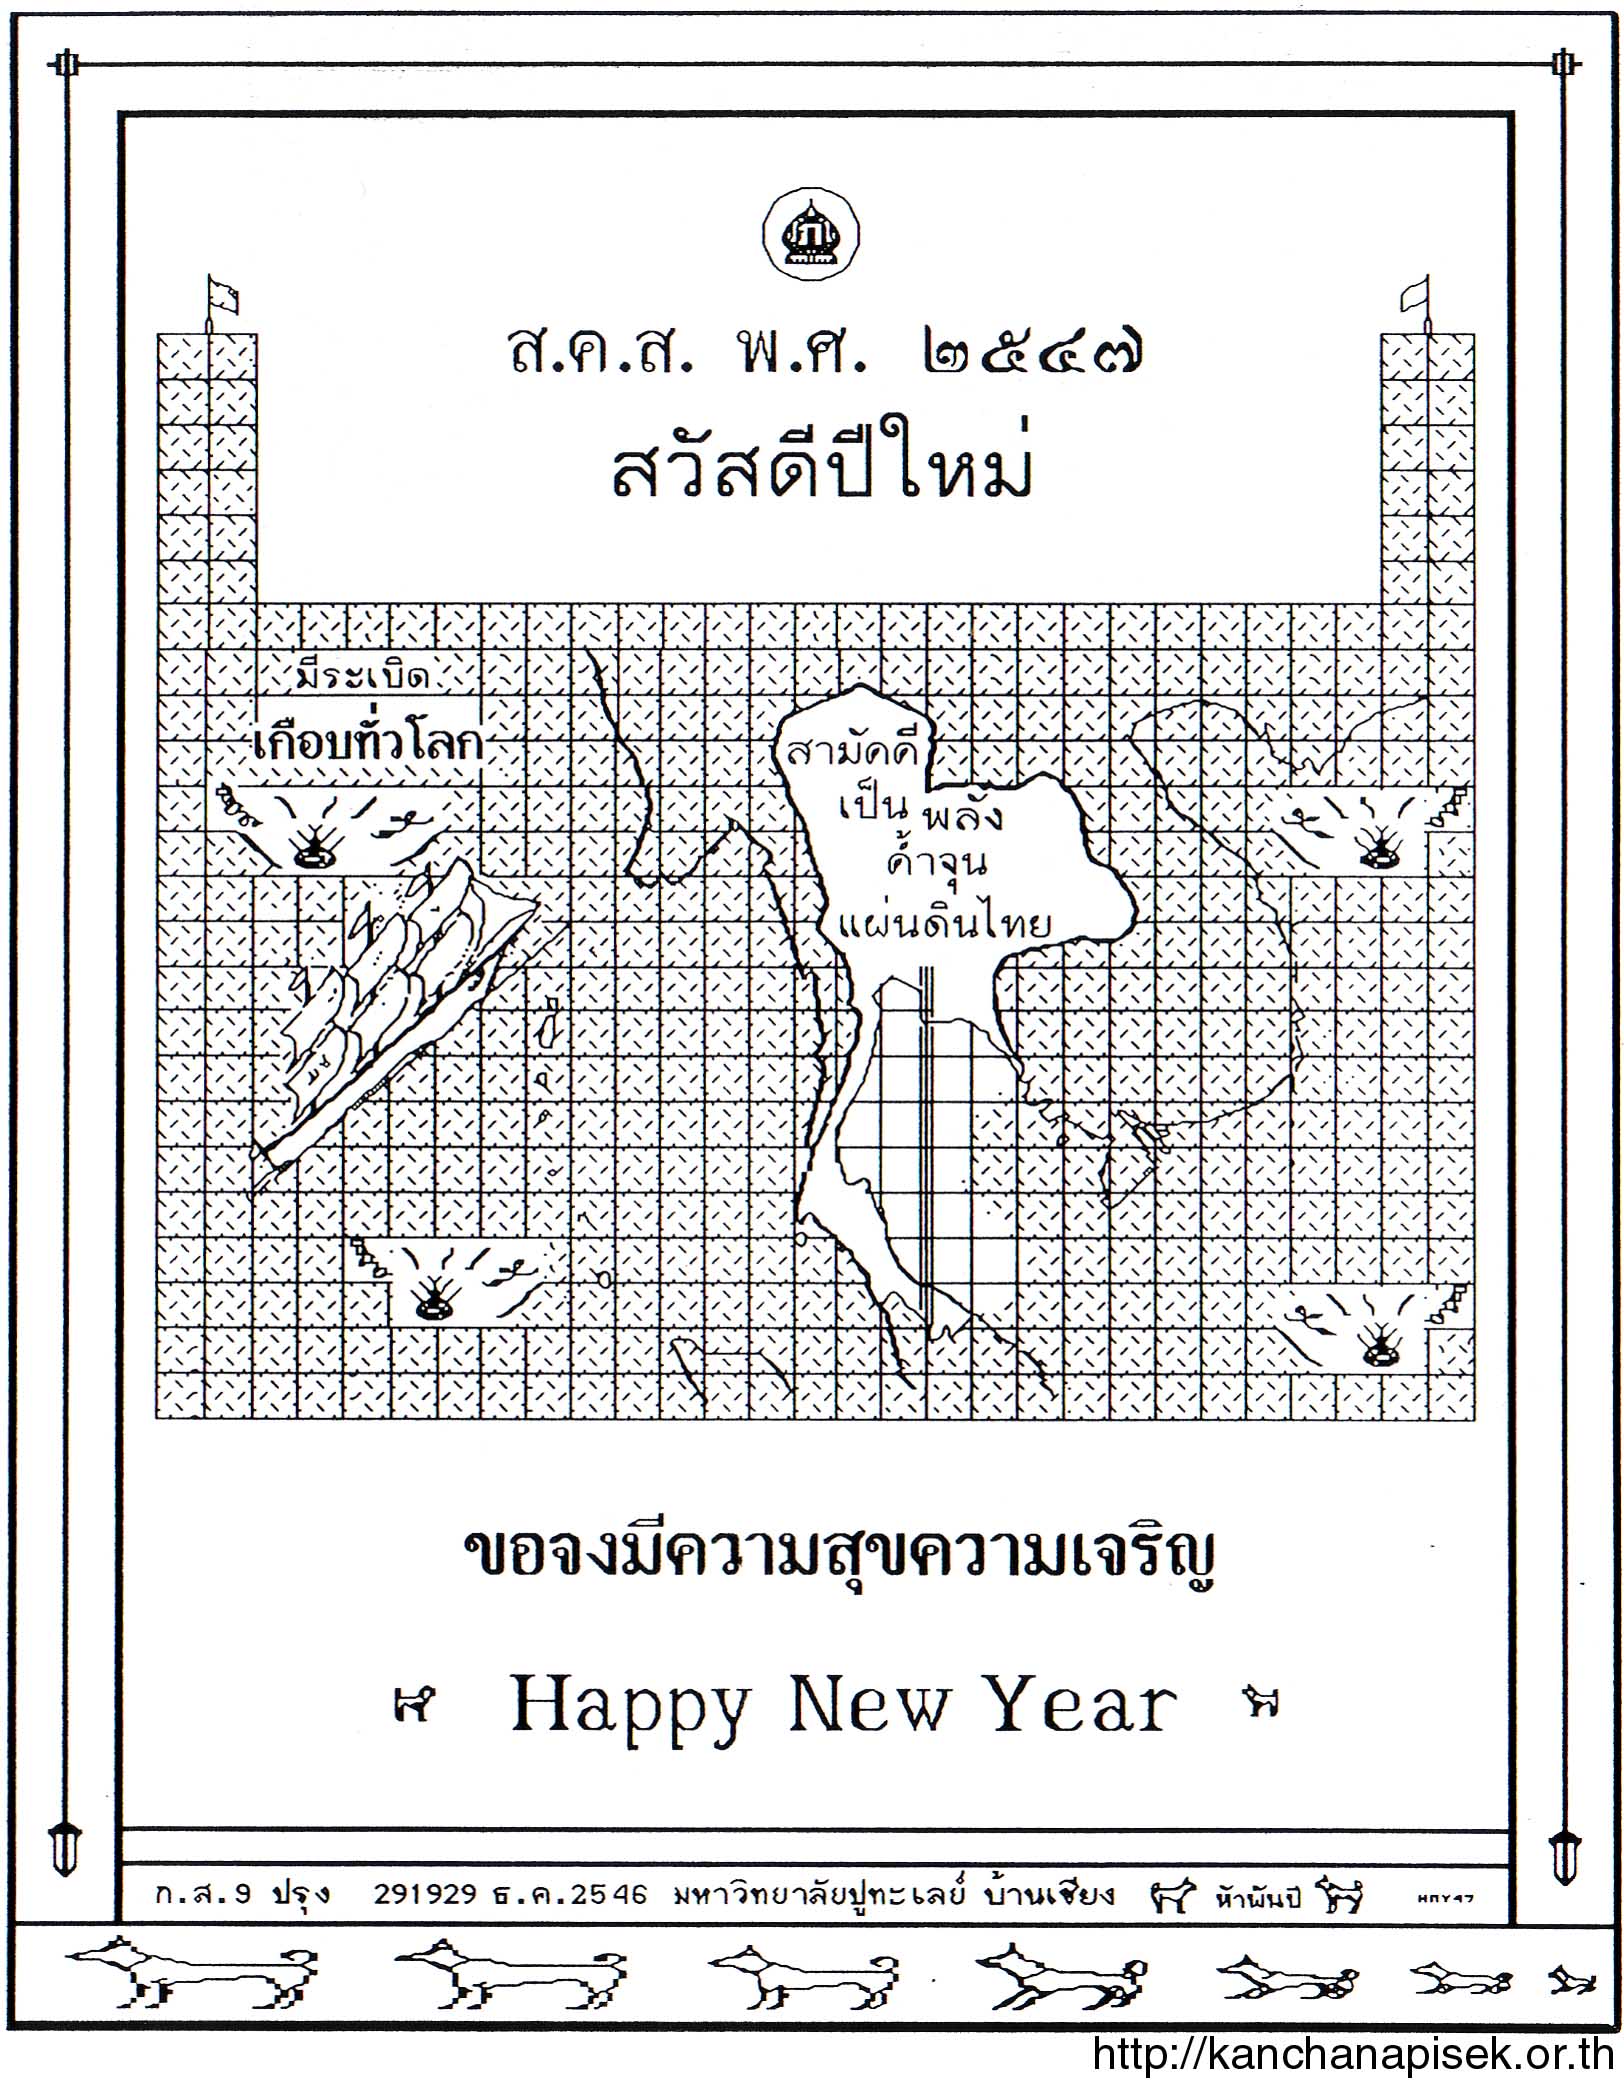 the new year card, 1600 pixels, 459KB.